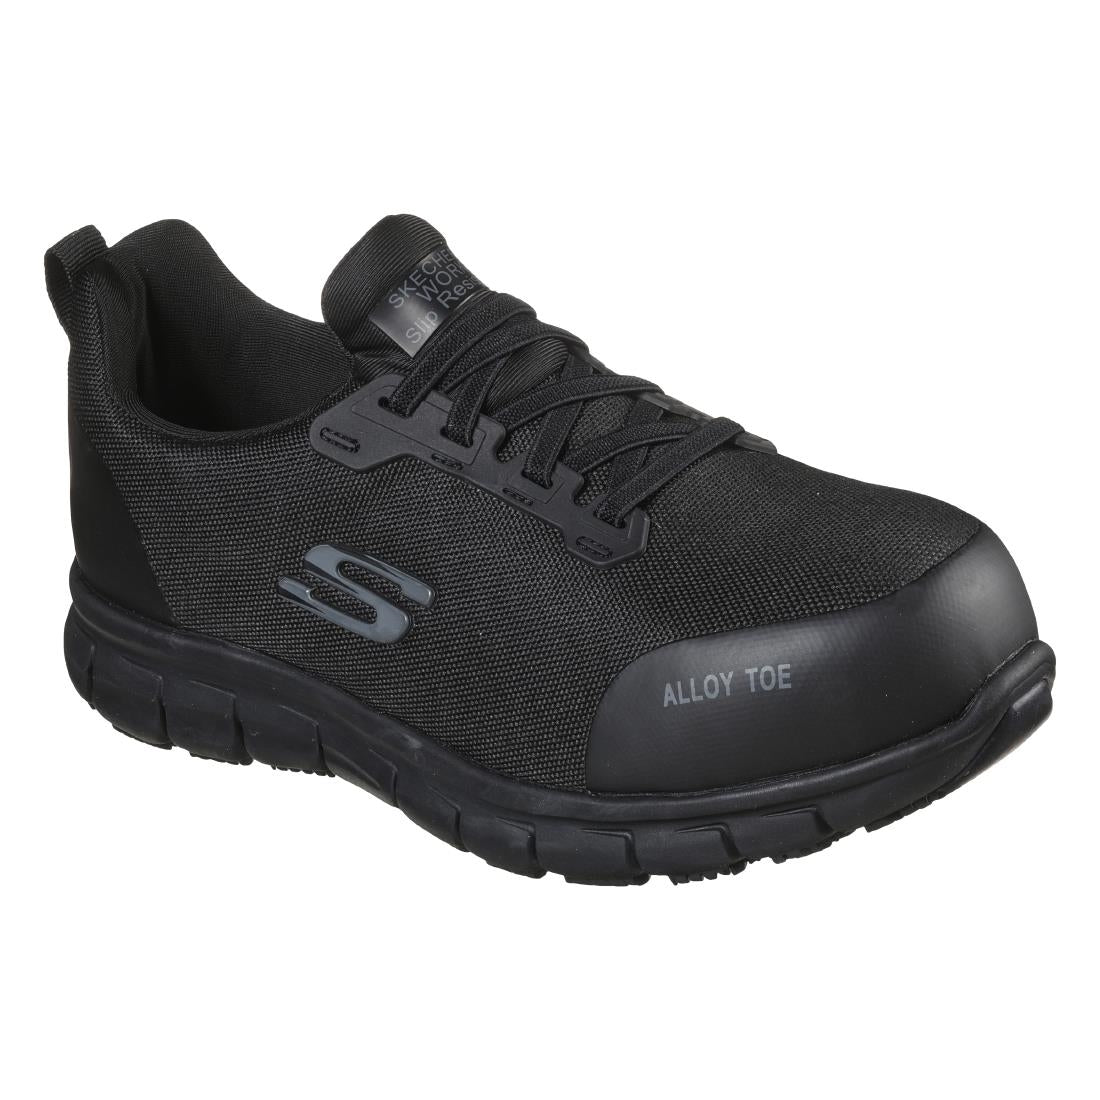 BB670-38 Skechers Womens Safety Shoe with Steel Toe Cap - Size 38 (UK 5) JD Catering Equipment Solutions Ltd